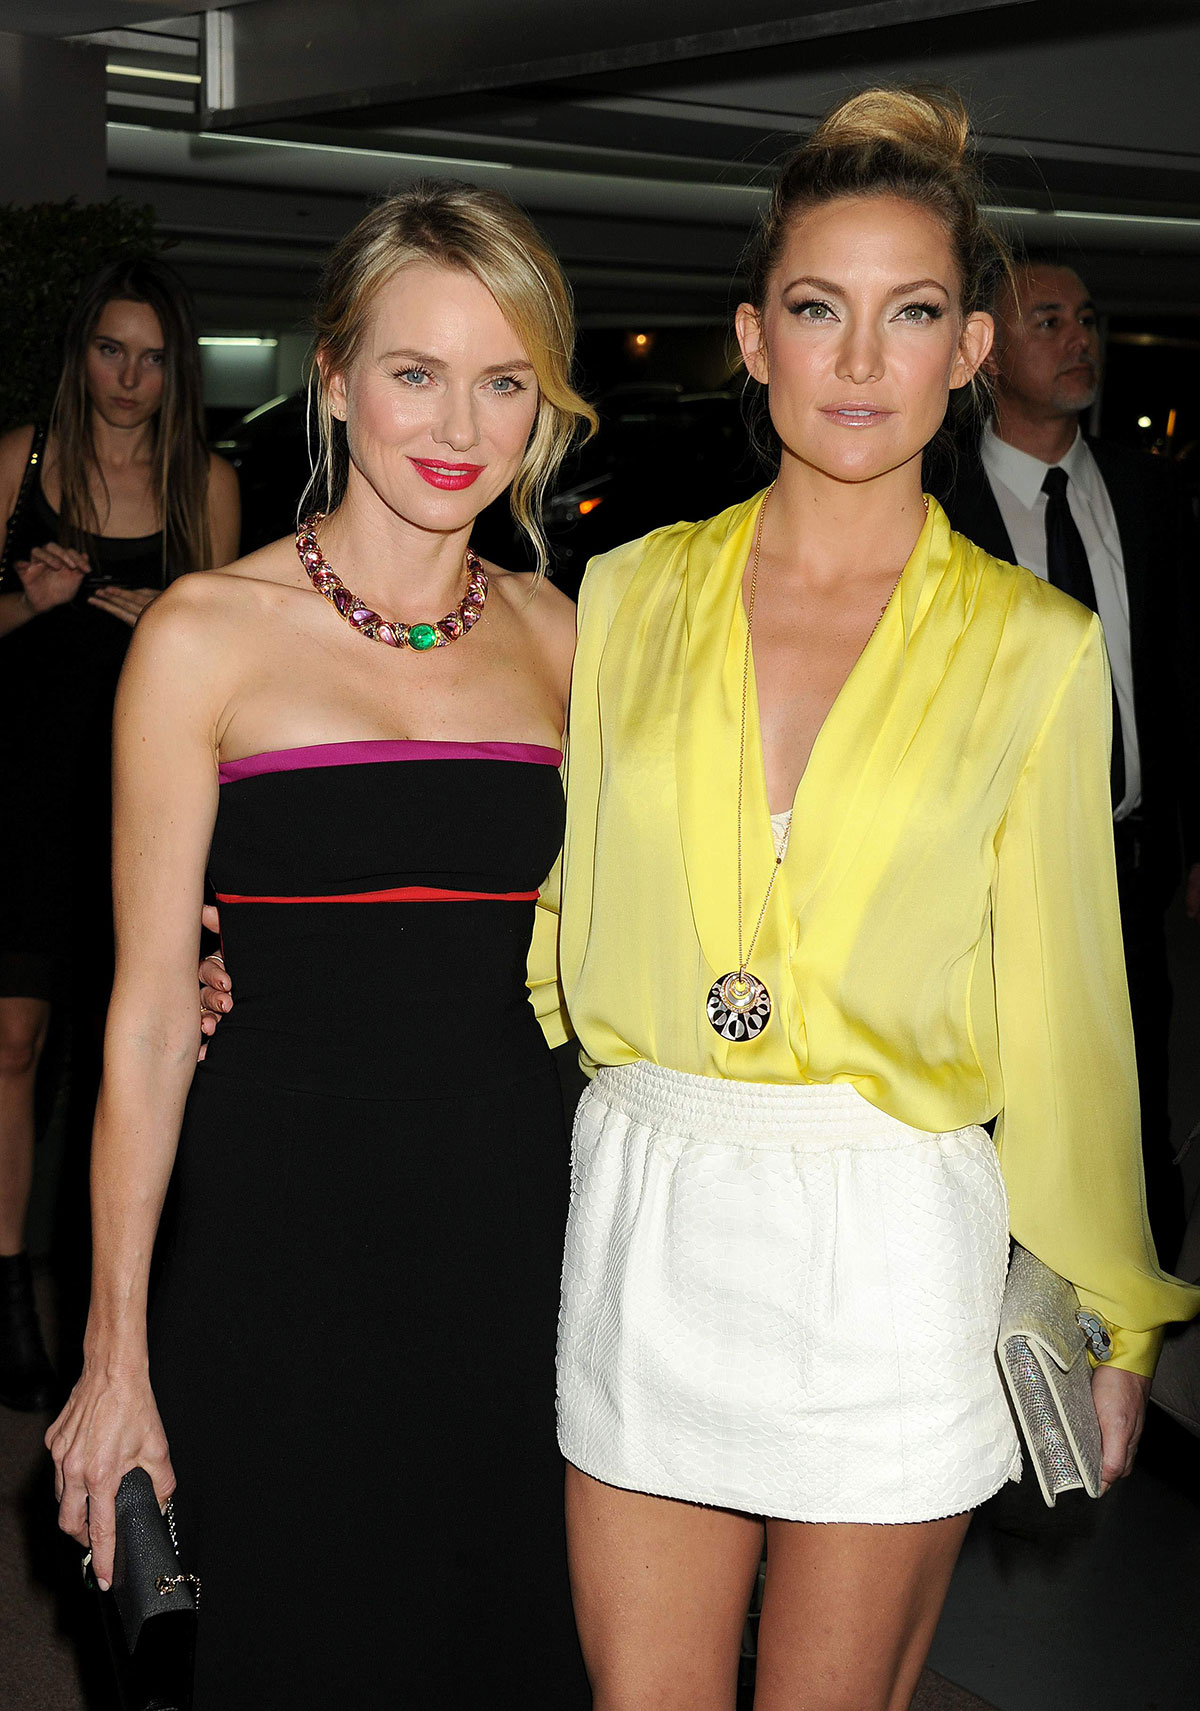 Kate Hudson attends BVLGARI Presents Decades Of Glamour